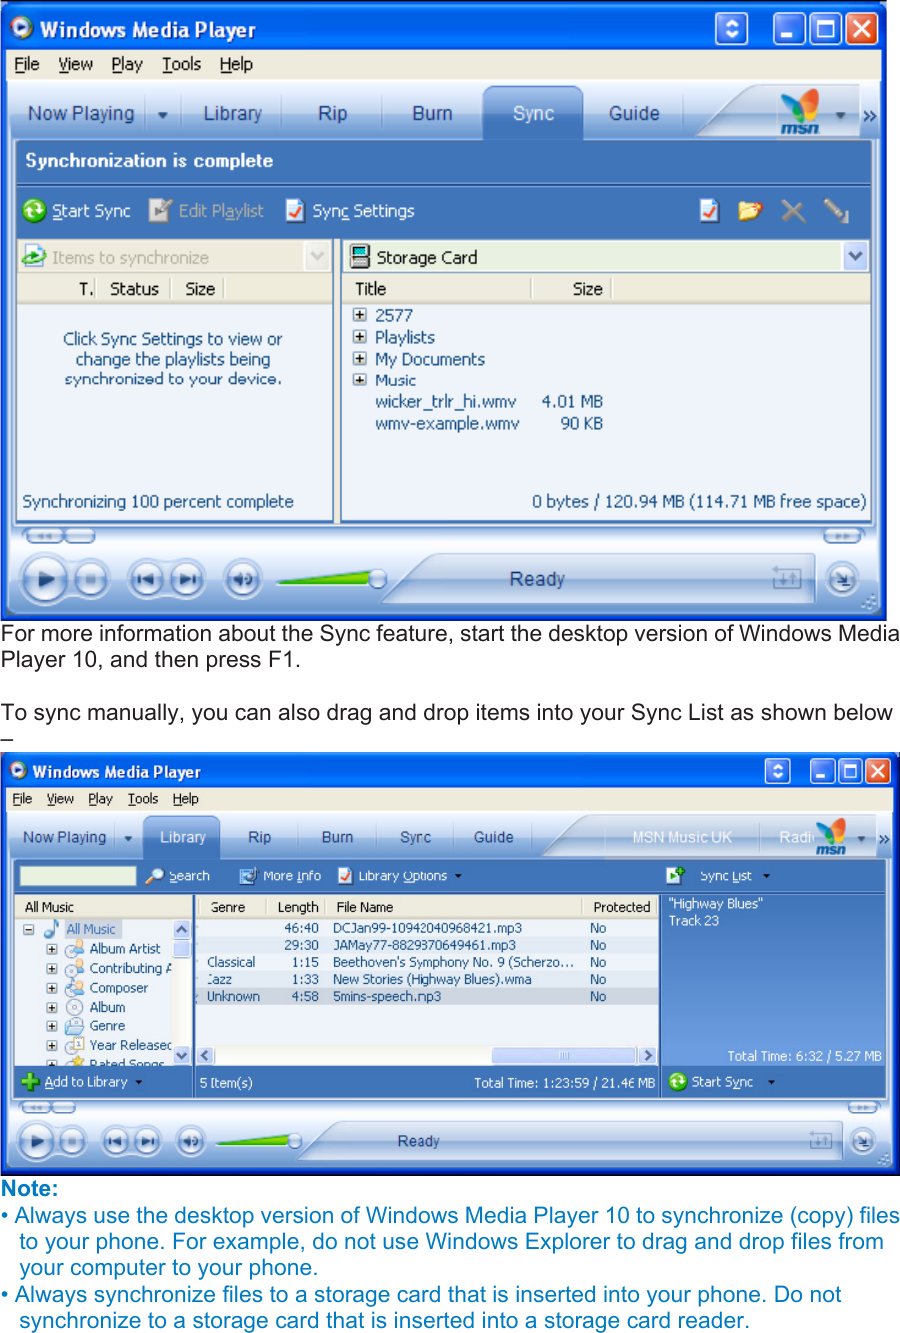  For more information about the Sync feature, start the desktop version of Windows Media Player 10, and then press F1.    To sync manually, you can also drag and drop items into your Sync List as shown below –  Note:  • Always use the desktop version of Windows Media Player 10 to synchronize (copy) files to your phone. For example, do not use Windows Explorer to drag and drop files from your computer to your phone.   • Always synchronize files to a storage card that is inserted into your phone. Do not synchronize to a storage card that is inserted into a storage card reader.   